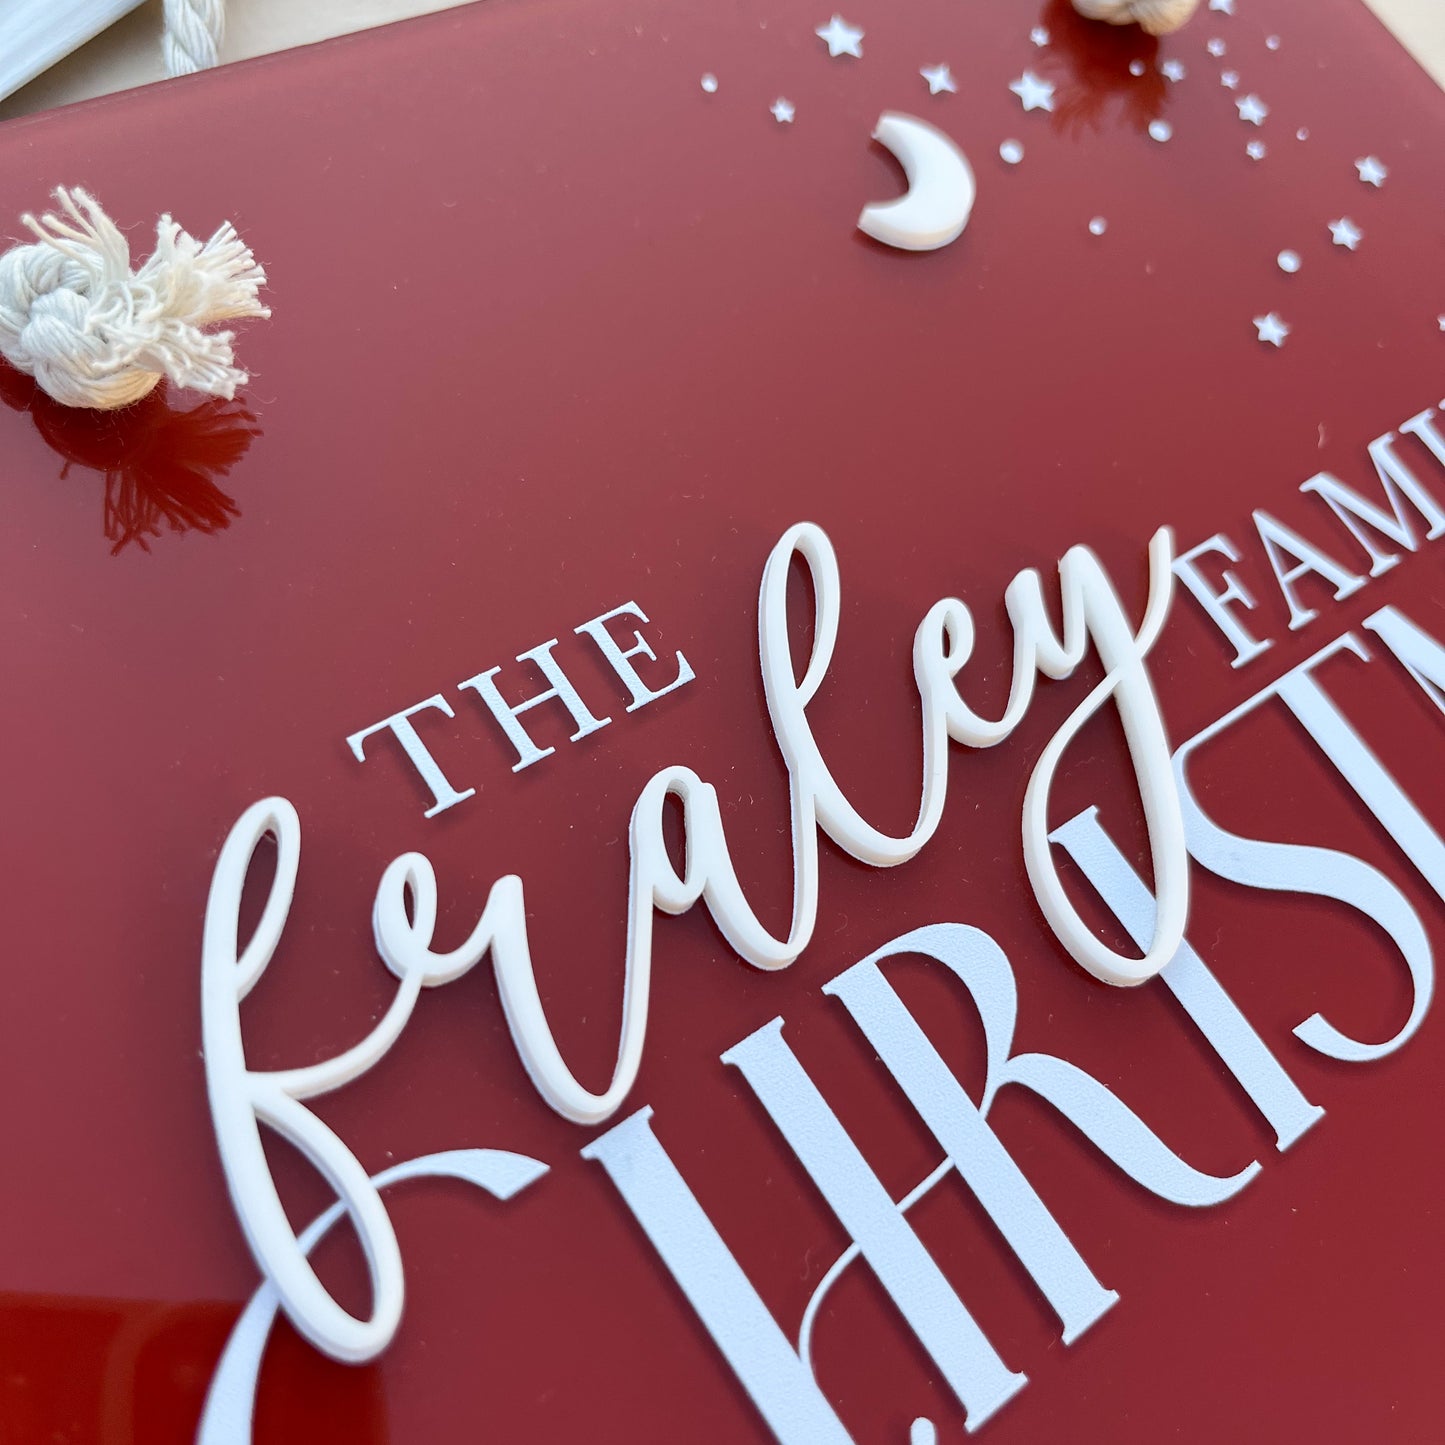 FAMILY CHRISTMAS SIGN | Personalised | Multiple Colour + Pattern Options